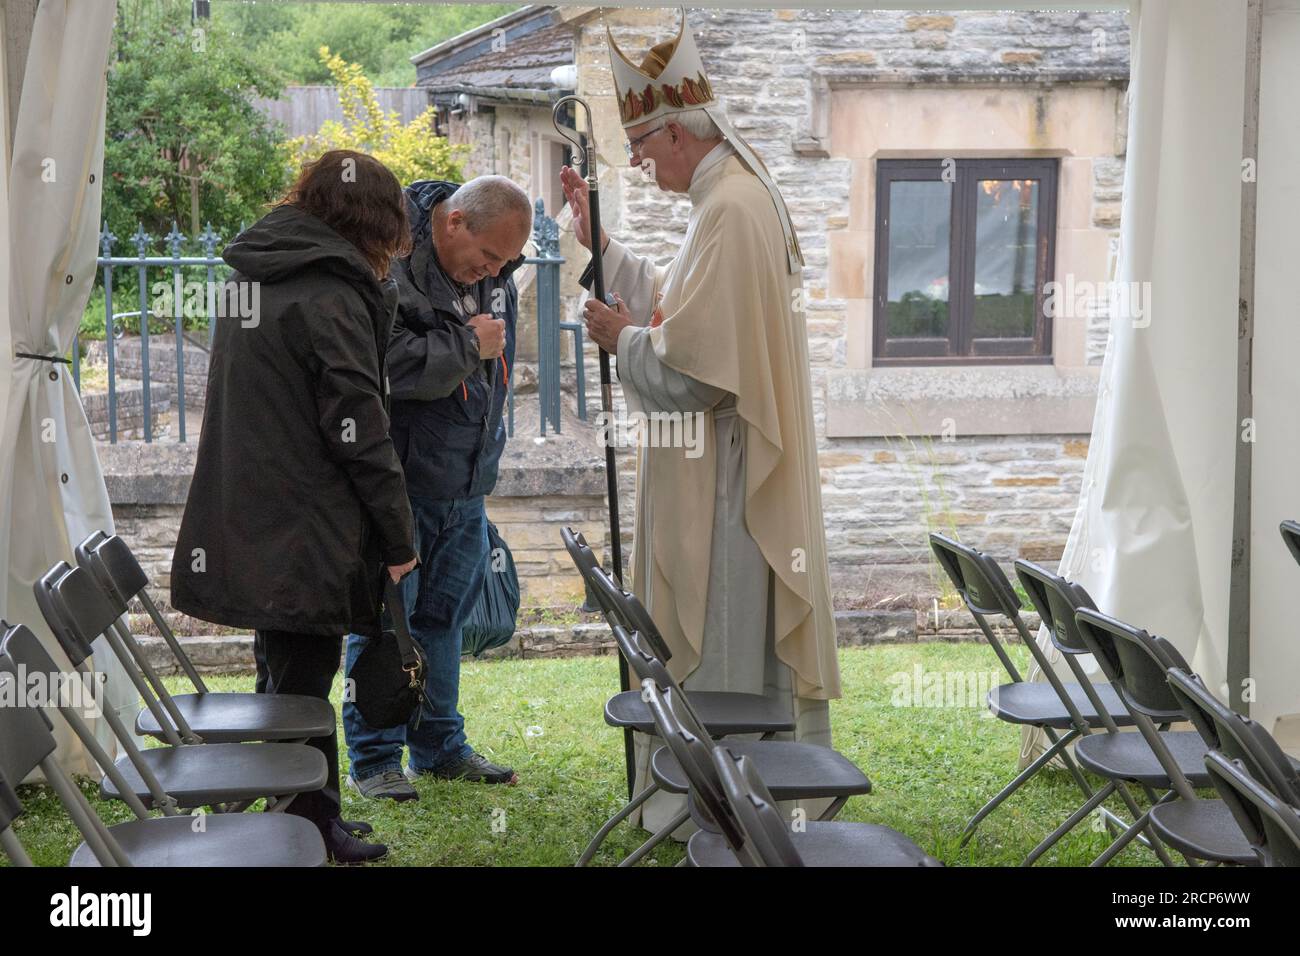 UK Catholic Bishop of Wrexham, the Right Reverend Peter M Brignall. He is blessing devout Catholics at Saint Winefride's Feast Day Pilgrimage, after an open air church service in a marquee. Holywell, Flintshire, Wales 25th June 2023. 2000s HOMER SYKES Stock Photo